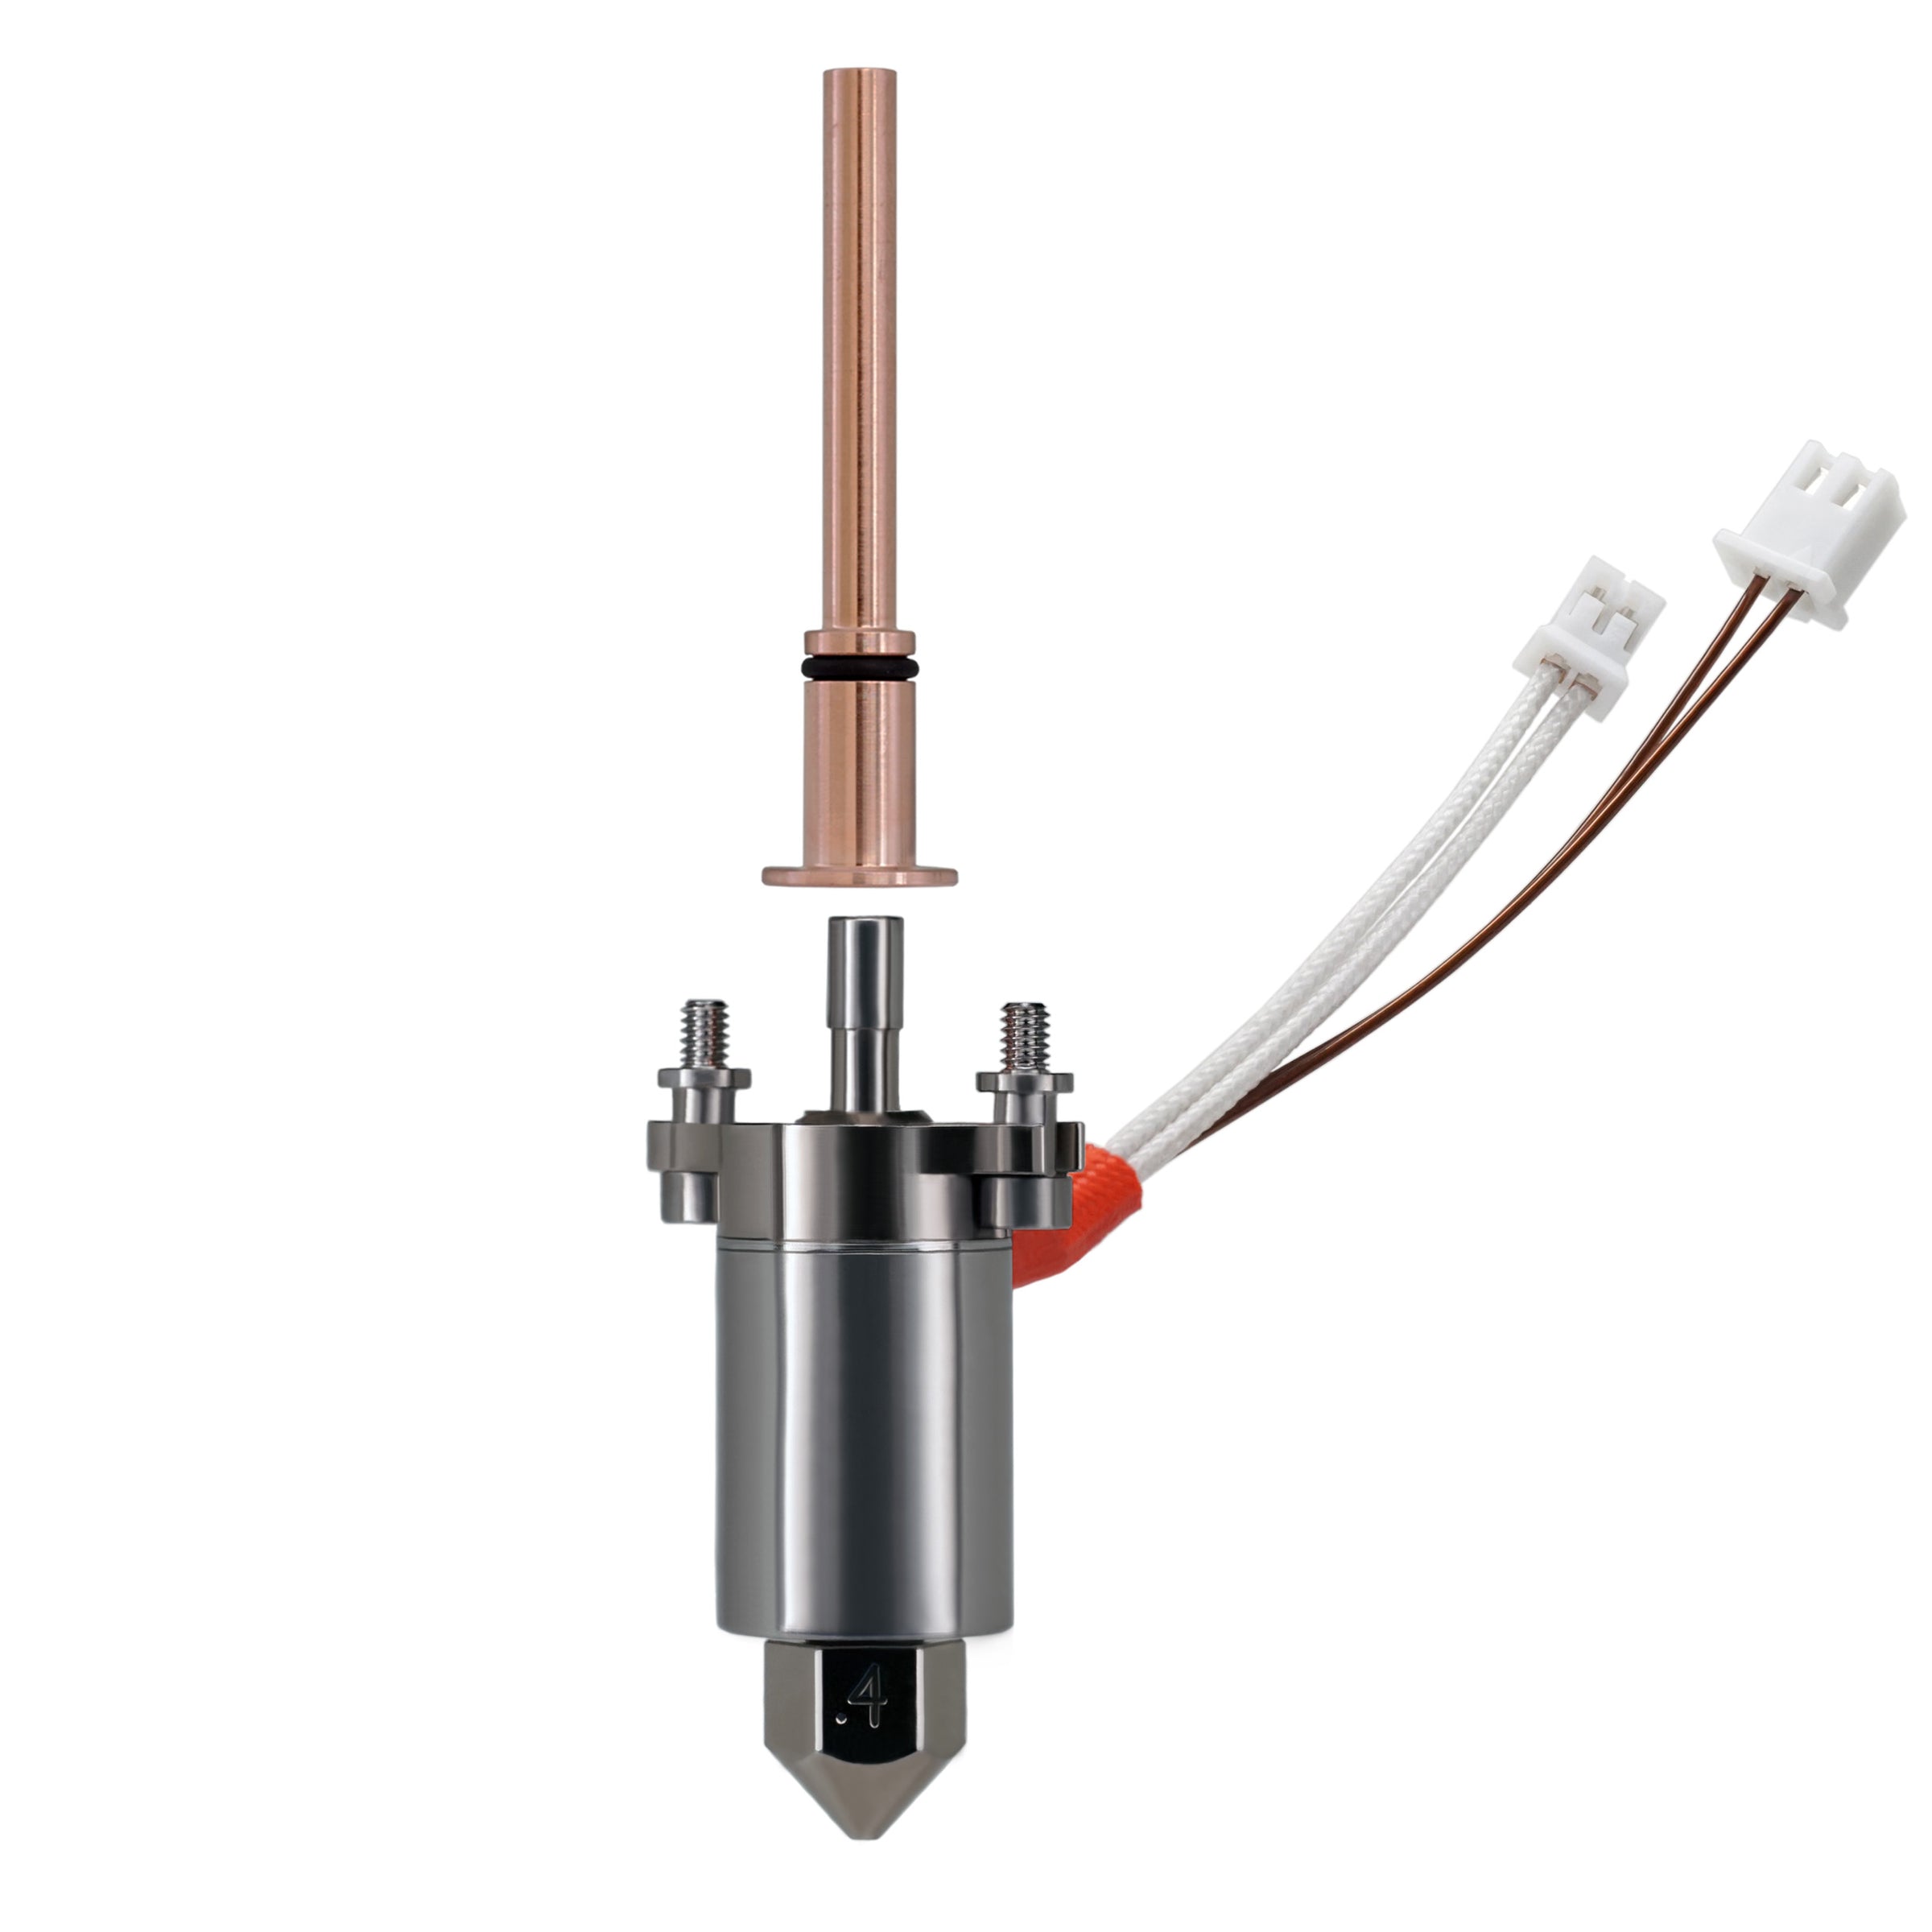 A Micro Swiss FlowTech Hotend for Creality K1C with electrical wires, featuring a cylindrical body, a cone-shaped tip, and an extended copper rod on top. The Leak-Proof Nozzle ensures precision while white connectors are attached to the wires. The Micro Swiss component also has screws for securing parts, making it compatible with the Creality K1C.

